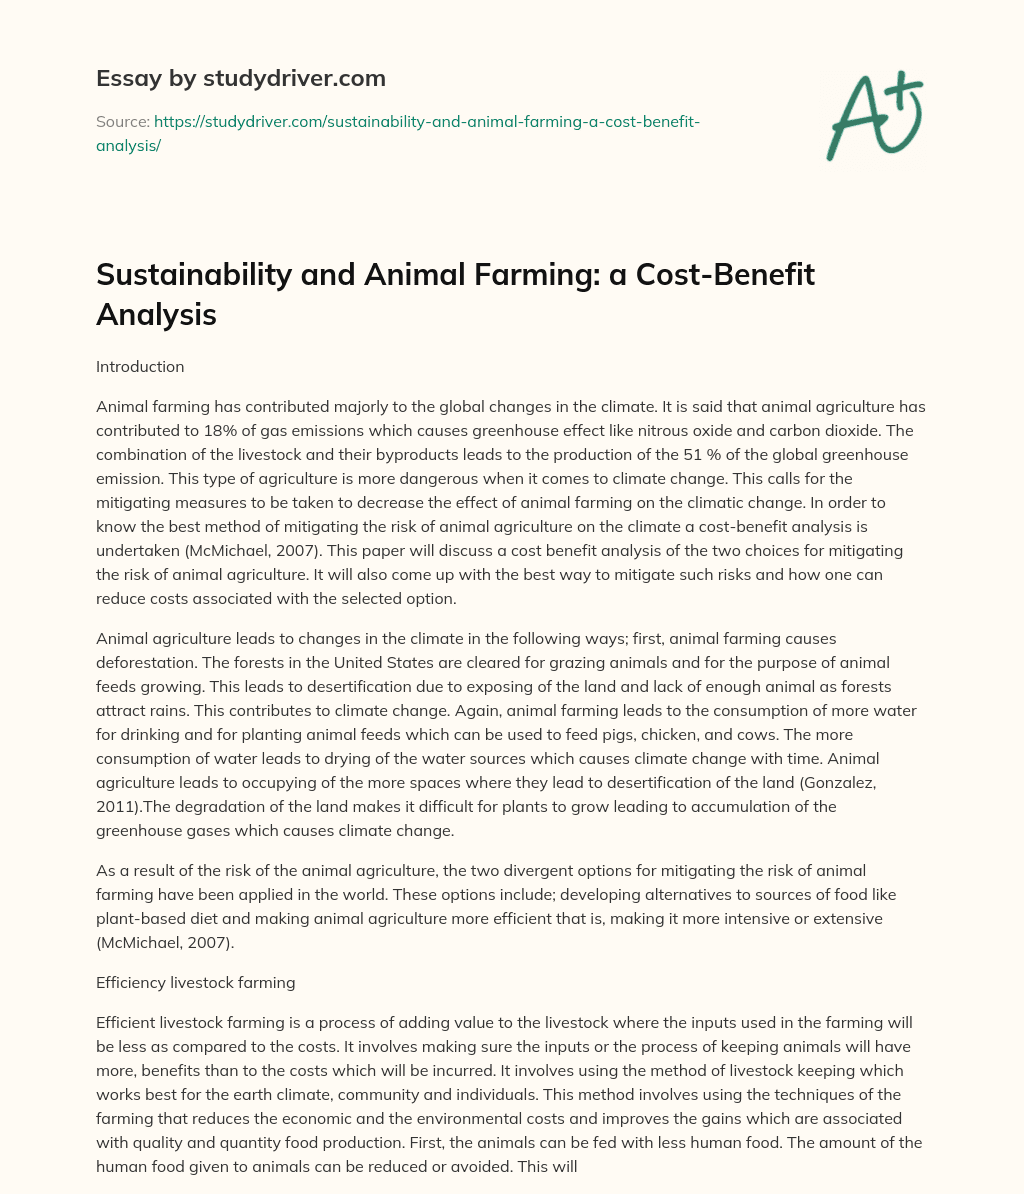 Sustainability and Animal Farming: a Cost-Benefit Analysis essay